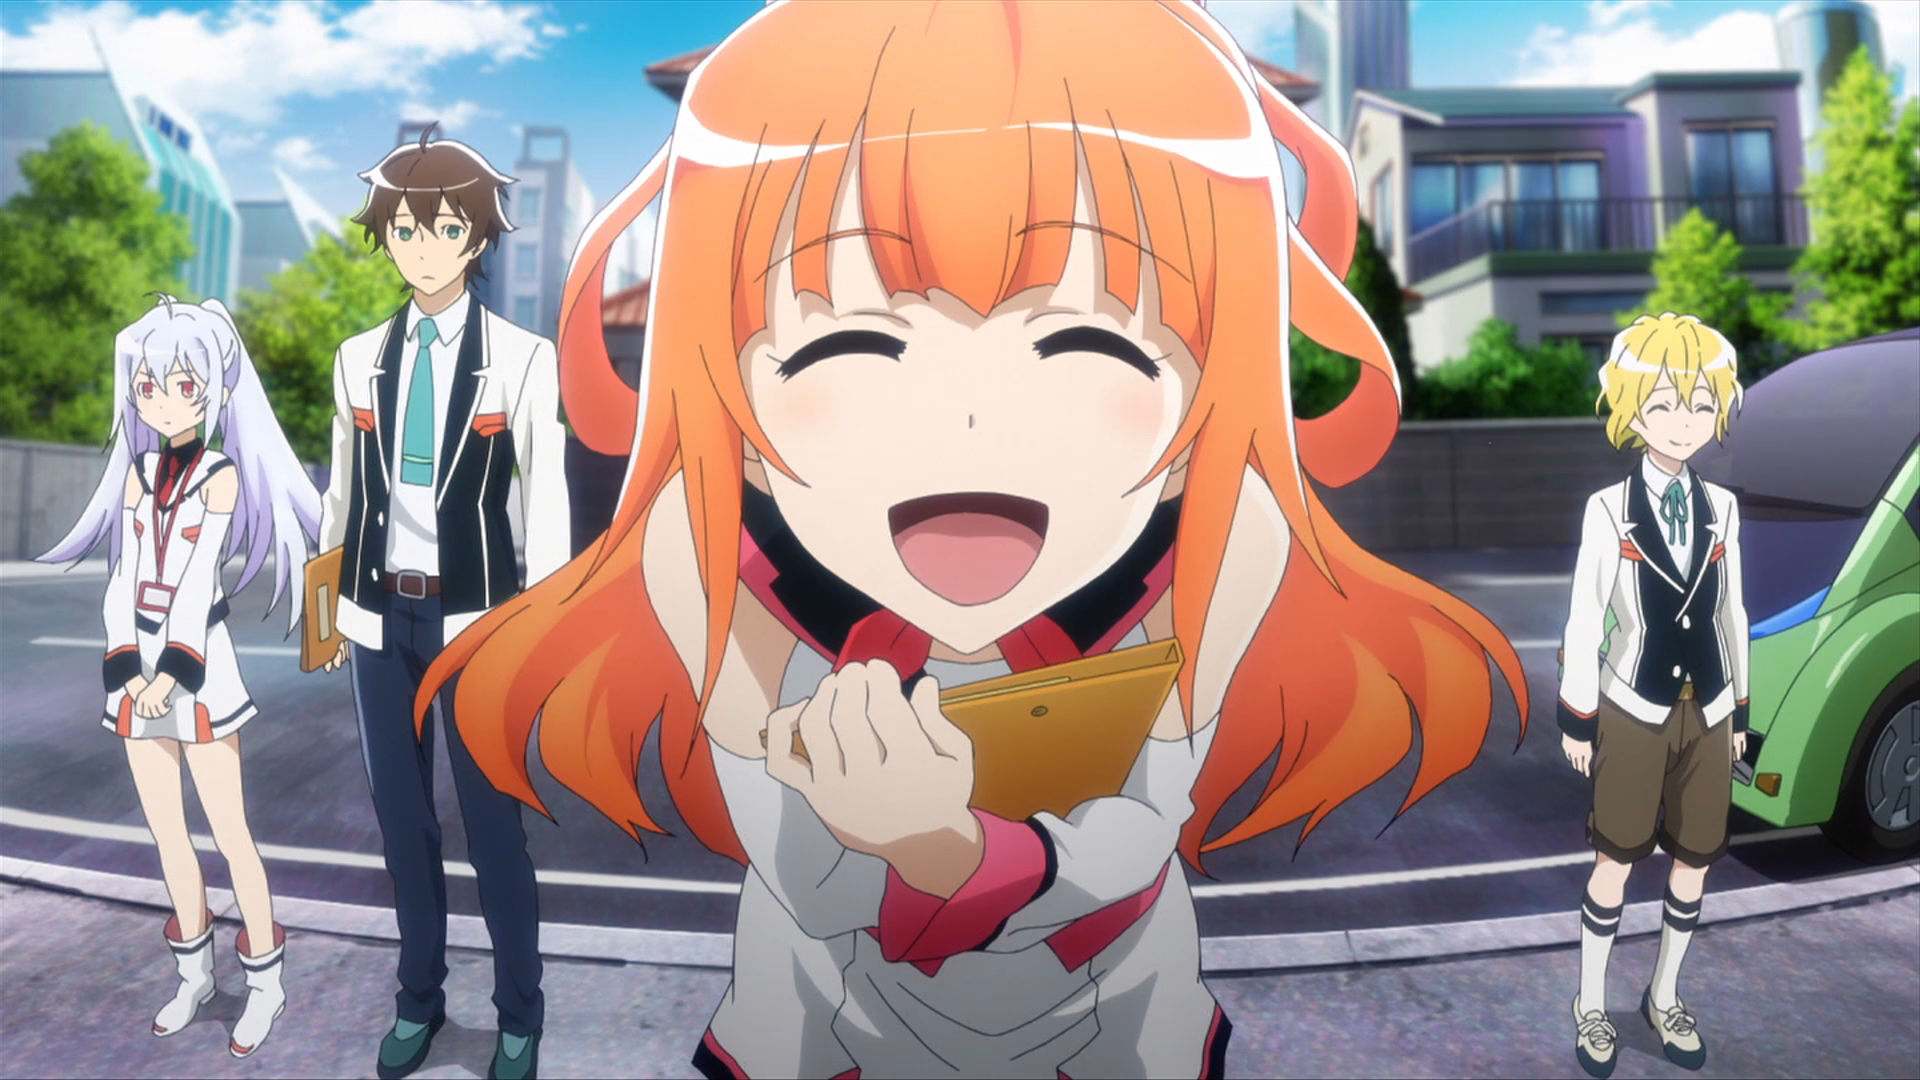 ‘Plastic Memories’ Makes A Surprise Trip on the Feels